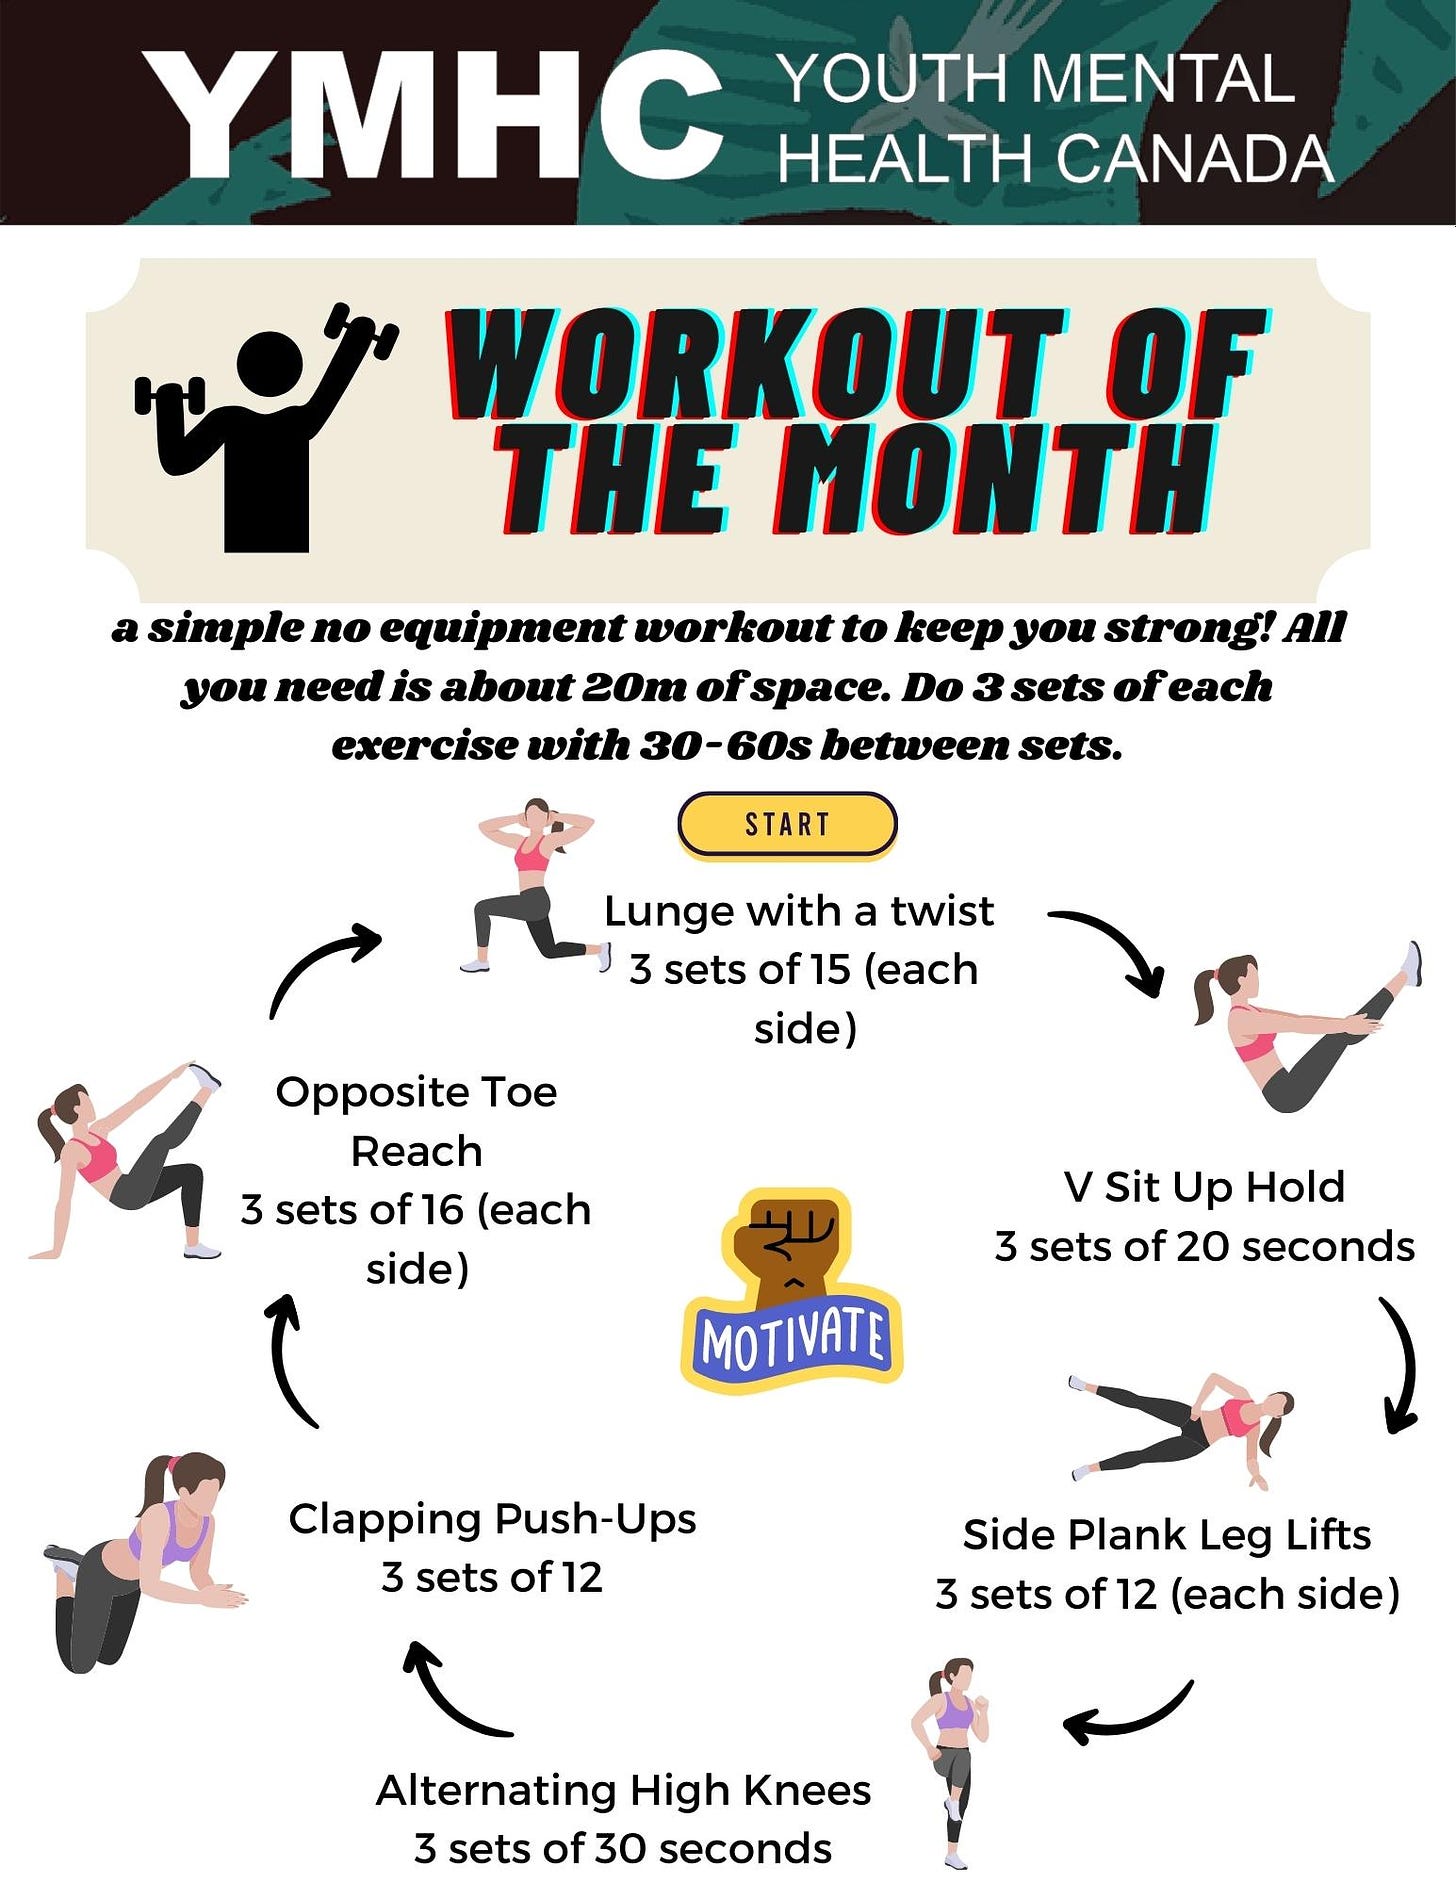 Alternating High Knees 3 sets of 30 seconds Lunge with a twist  3 sets of 15 (each side) Opposite Toe Reach 3 sets of 16 (each side) Clapping Push-Ups 3 sets of 12 Side Plank Leg Lifts 3 sets of 12 (each side) V Sit Up Hold 3 sets of 20 seconds a simple no equipment workout to keep you strong! All you need is about 20m of space. Do 3 sets of each exercise with 30-60s between sets.